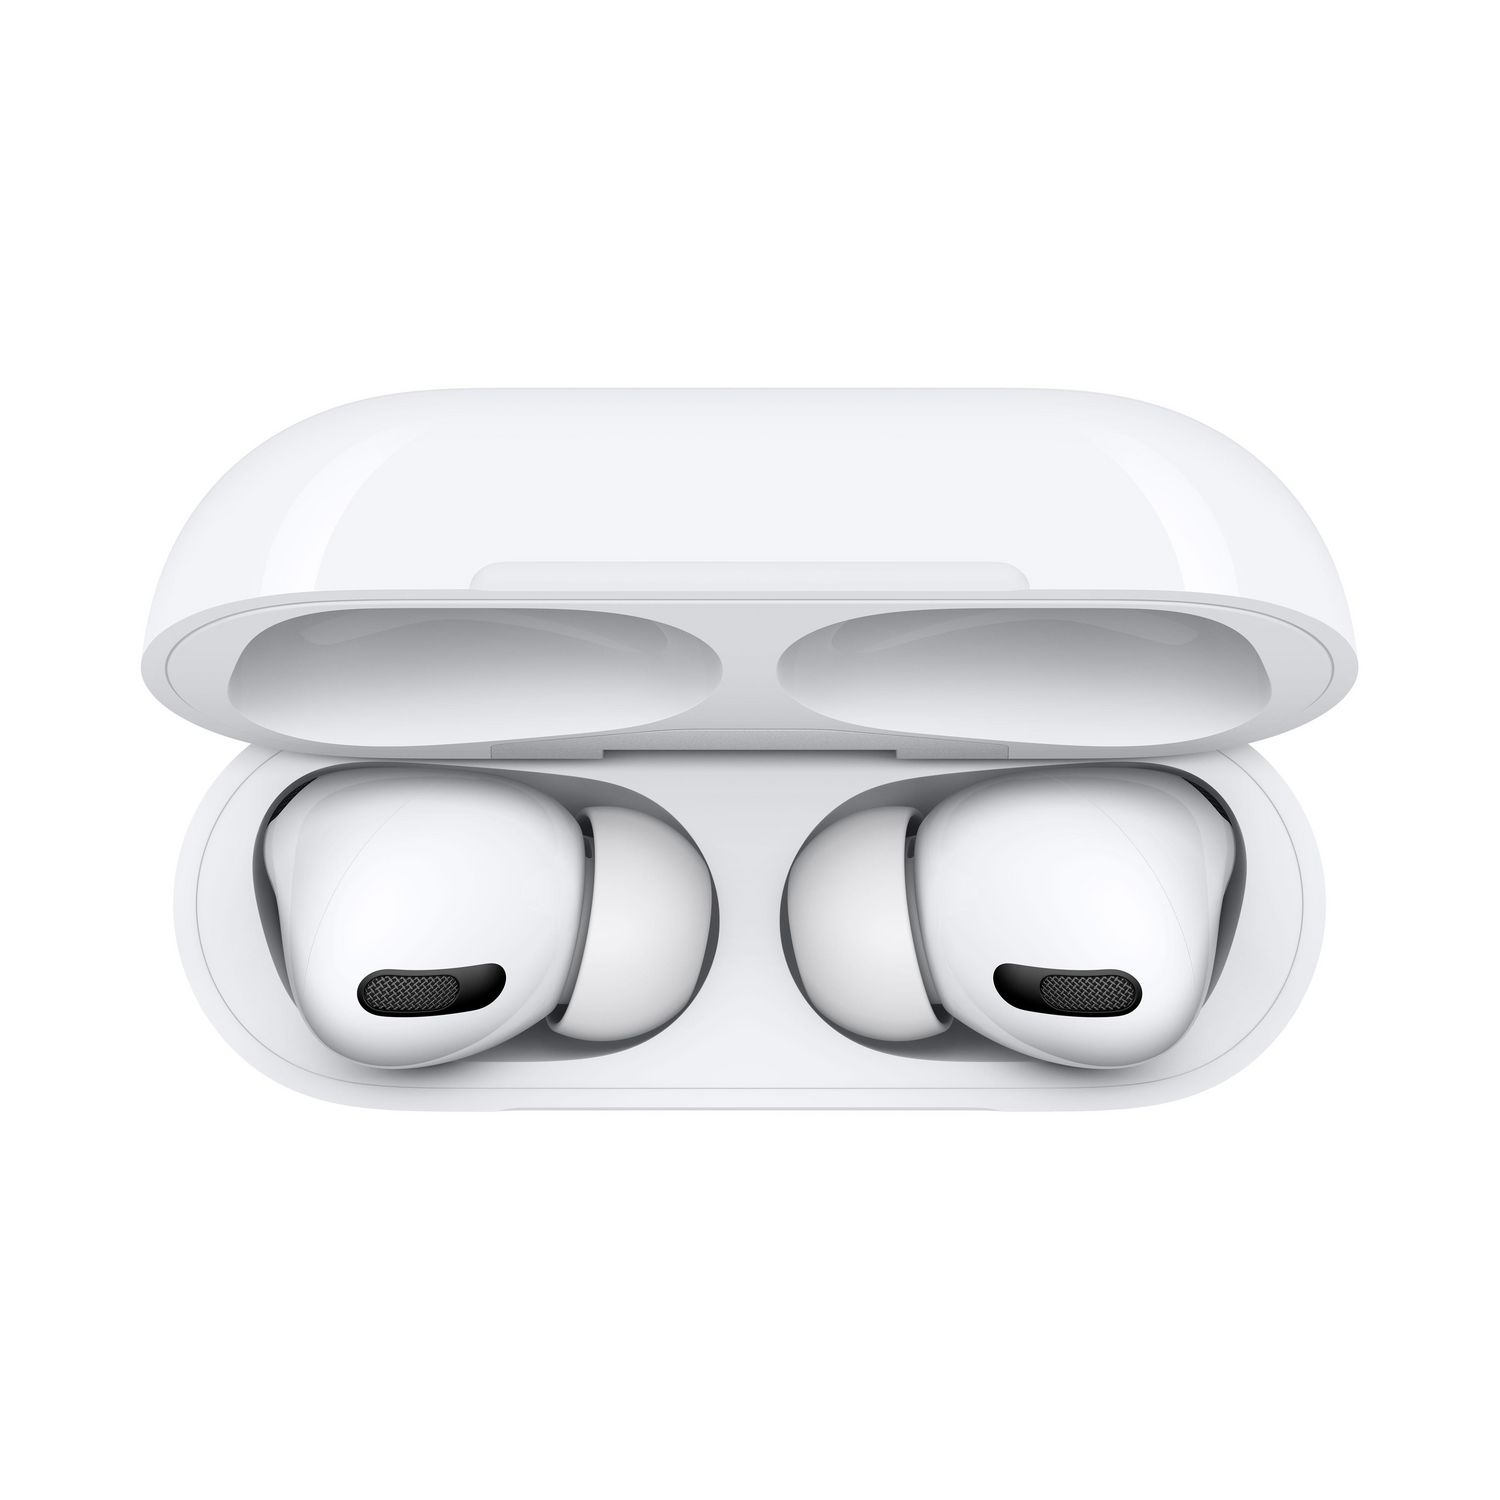 AirPods Pro (with MagSafe Charging Case, 1st gen)